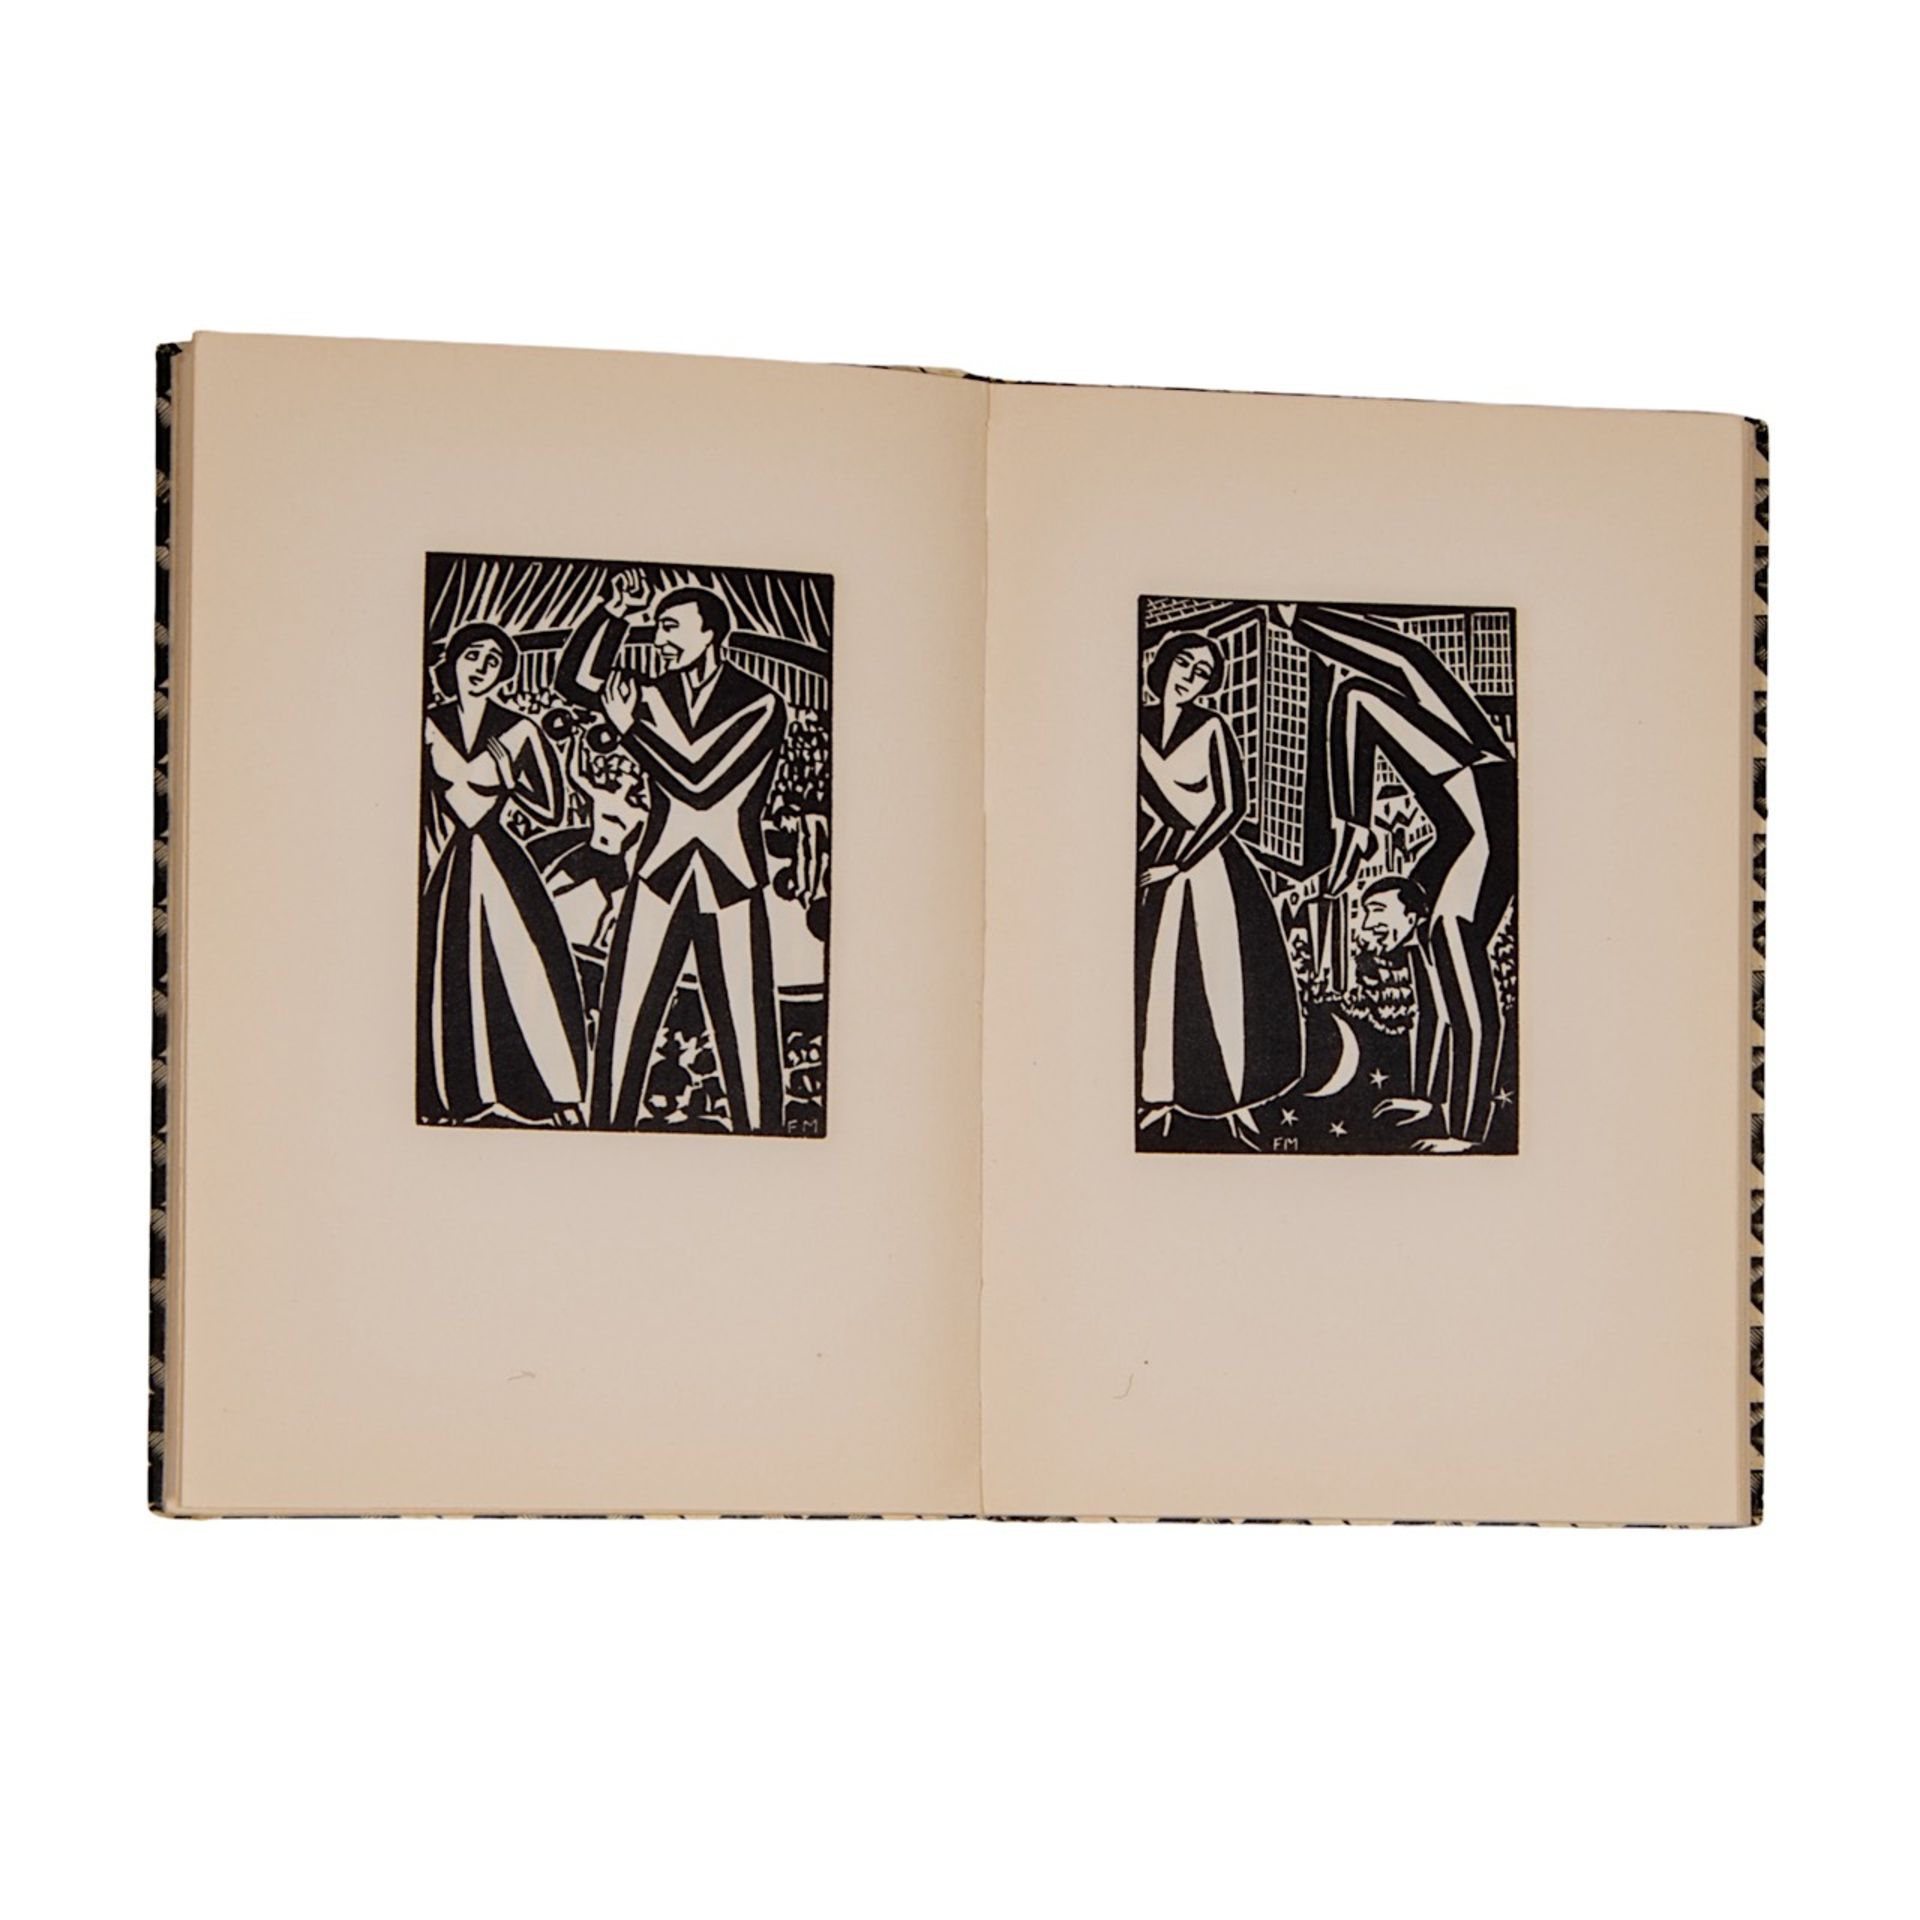 Frans Masereel (1889-1972), "Notre temps" (1952), with the original 12 design drawings by the artist - Image 5 of 13